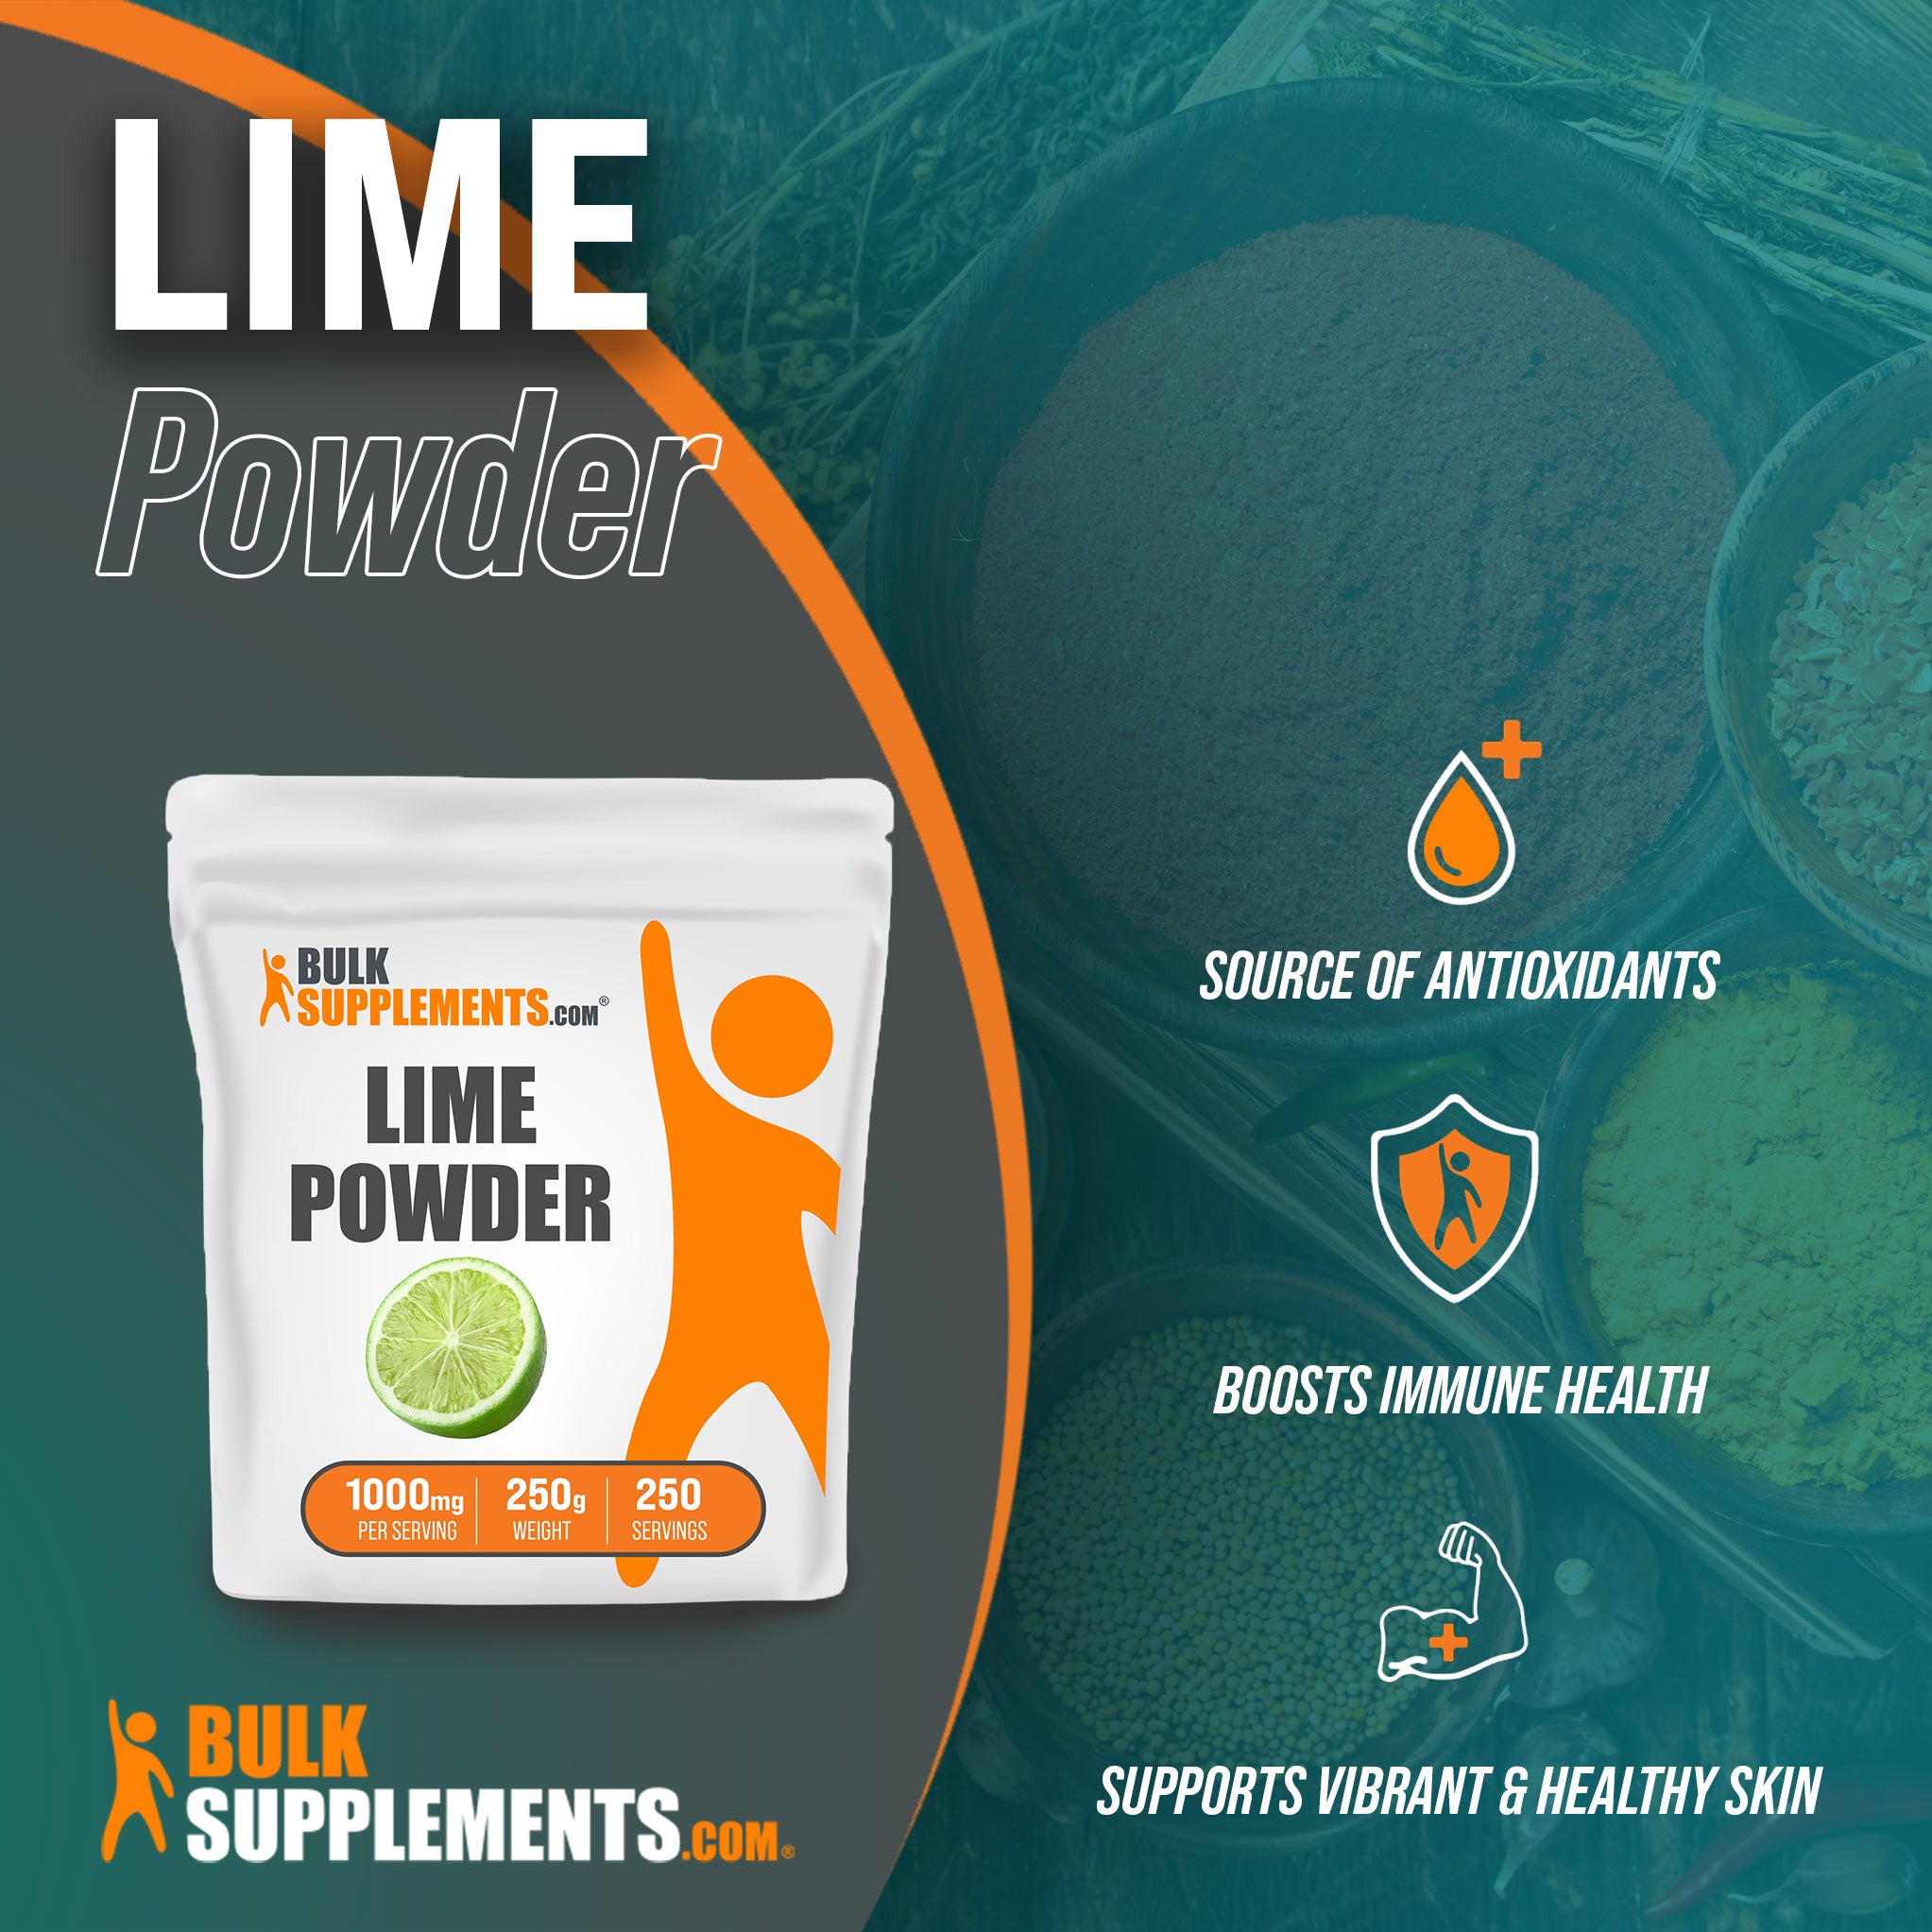 Benefits of Lime Powder: source of antioxidants, boosts immune health, supports vibrant and healthy skin